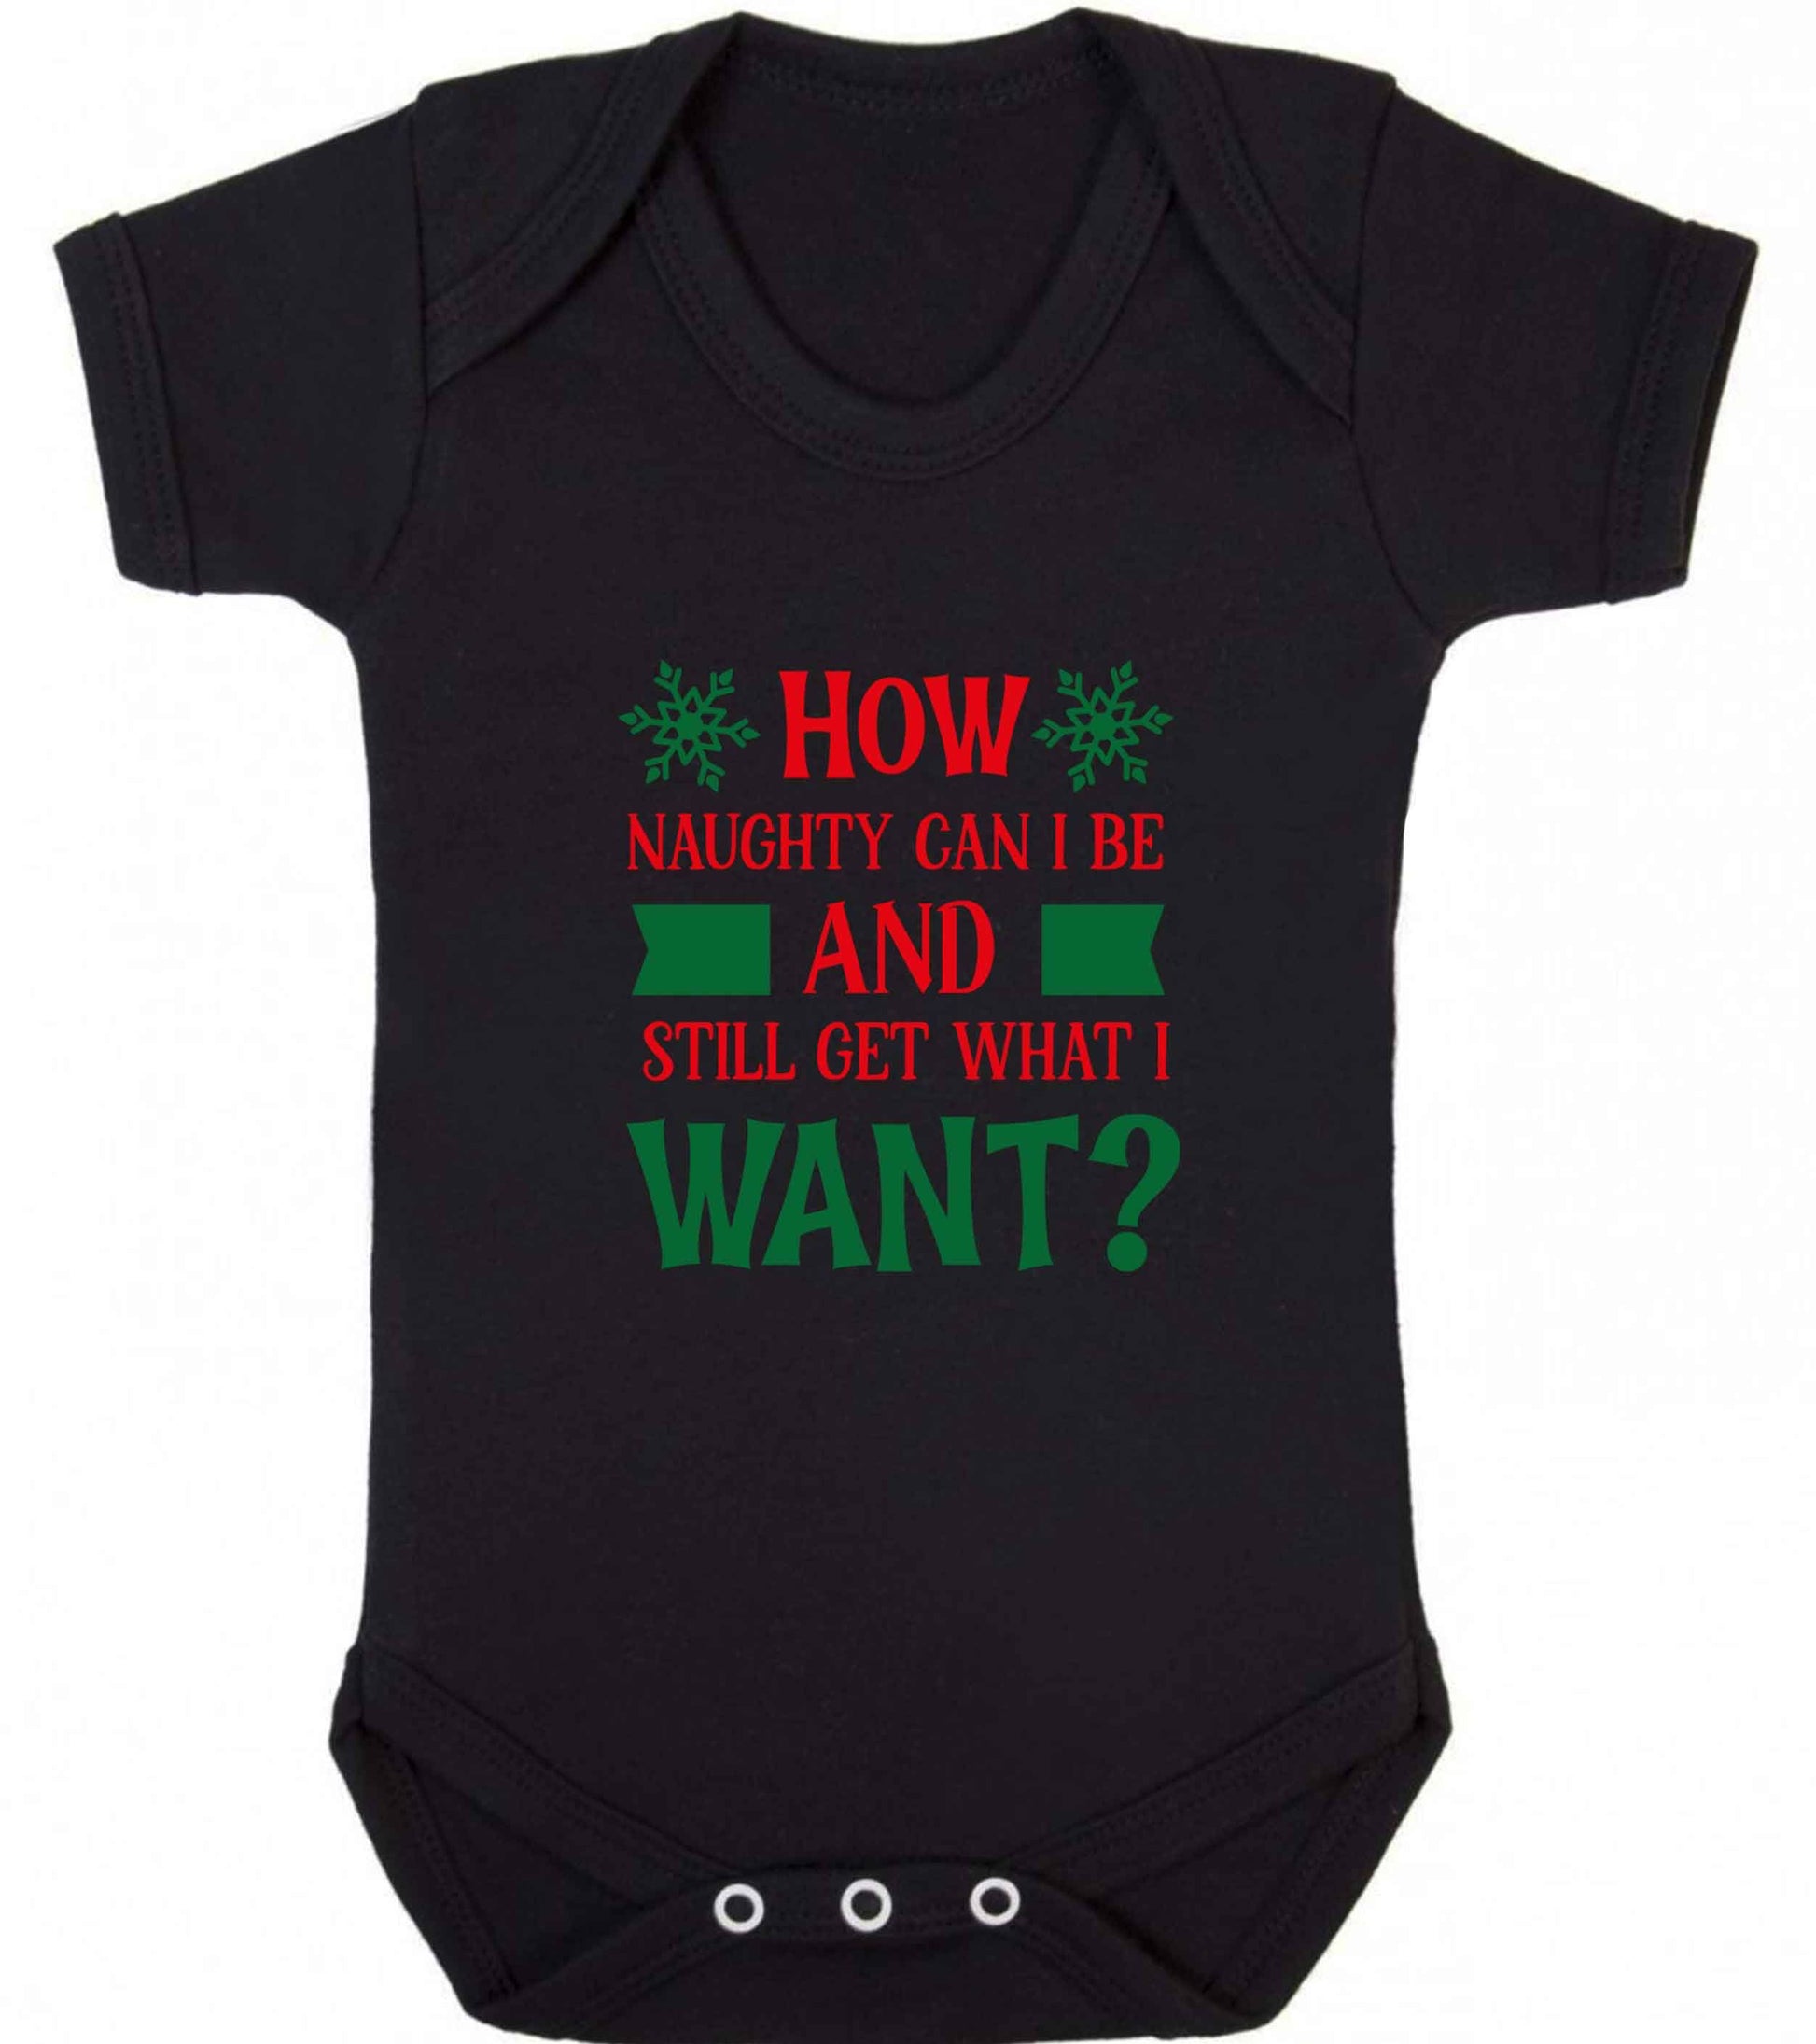 How naughty can I be and still get what I want? baby vest black 18-24 months